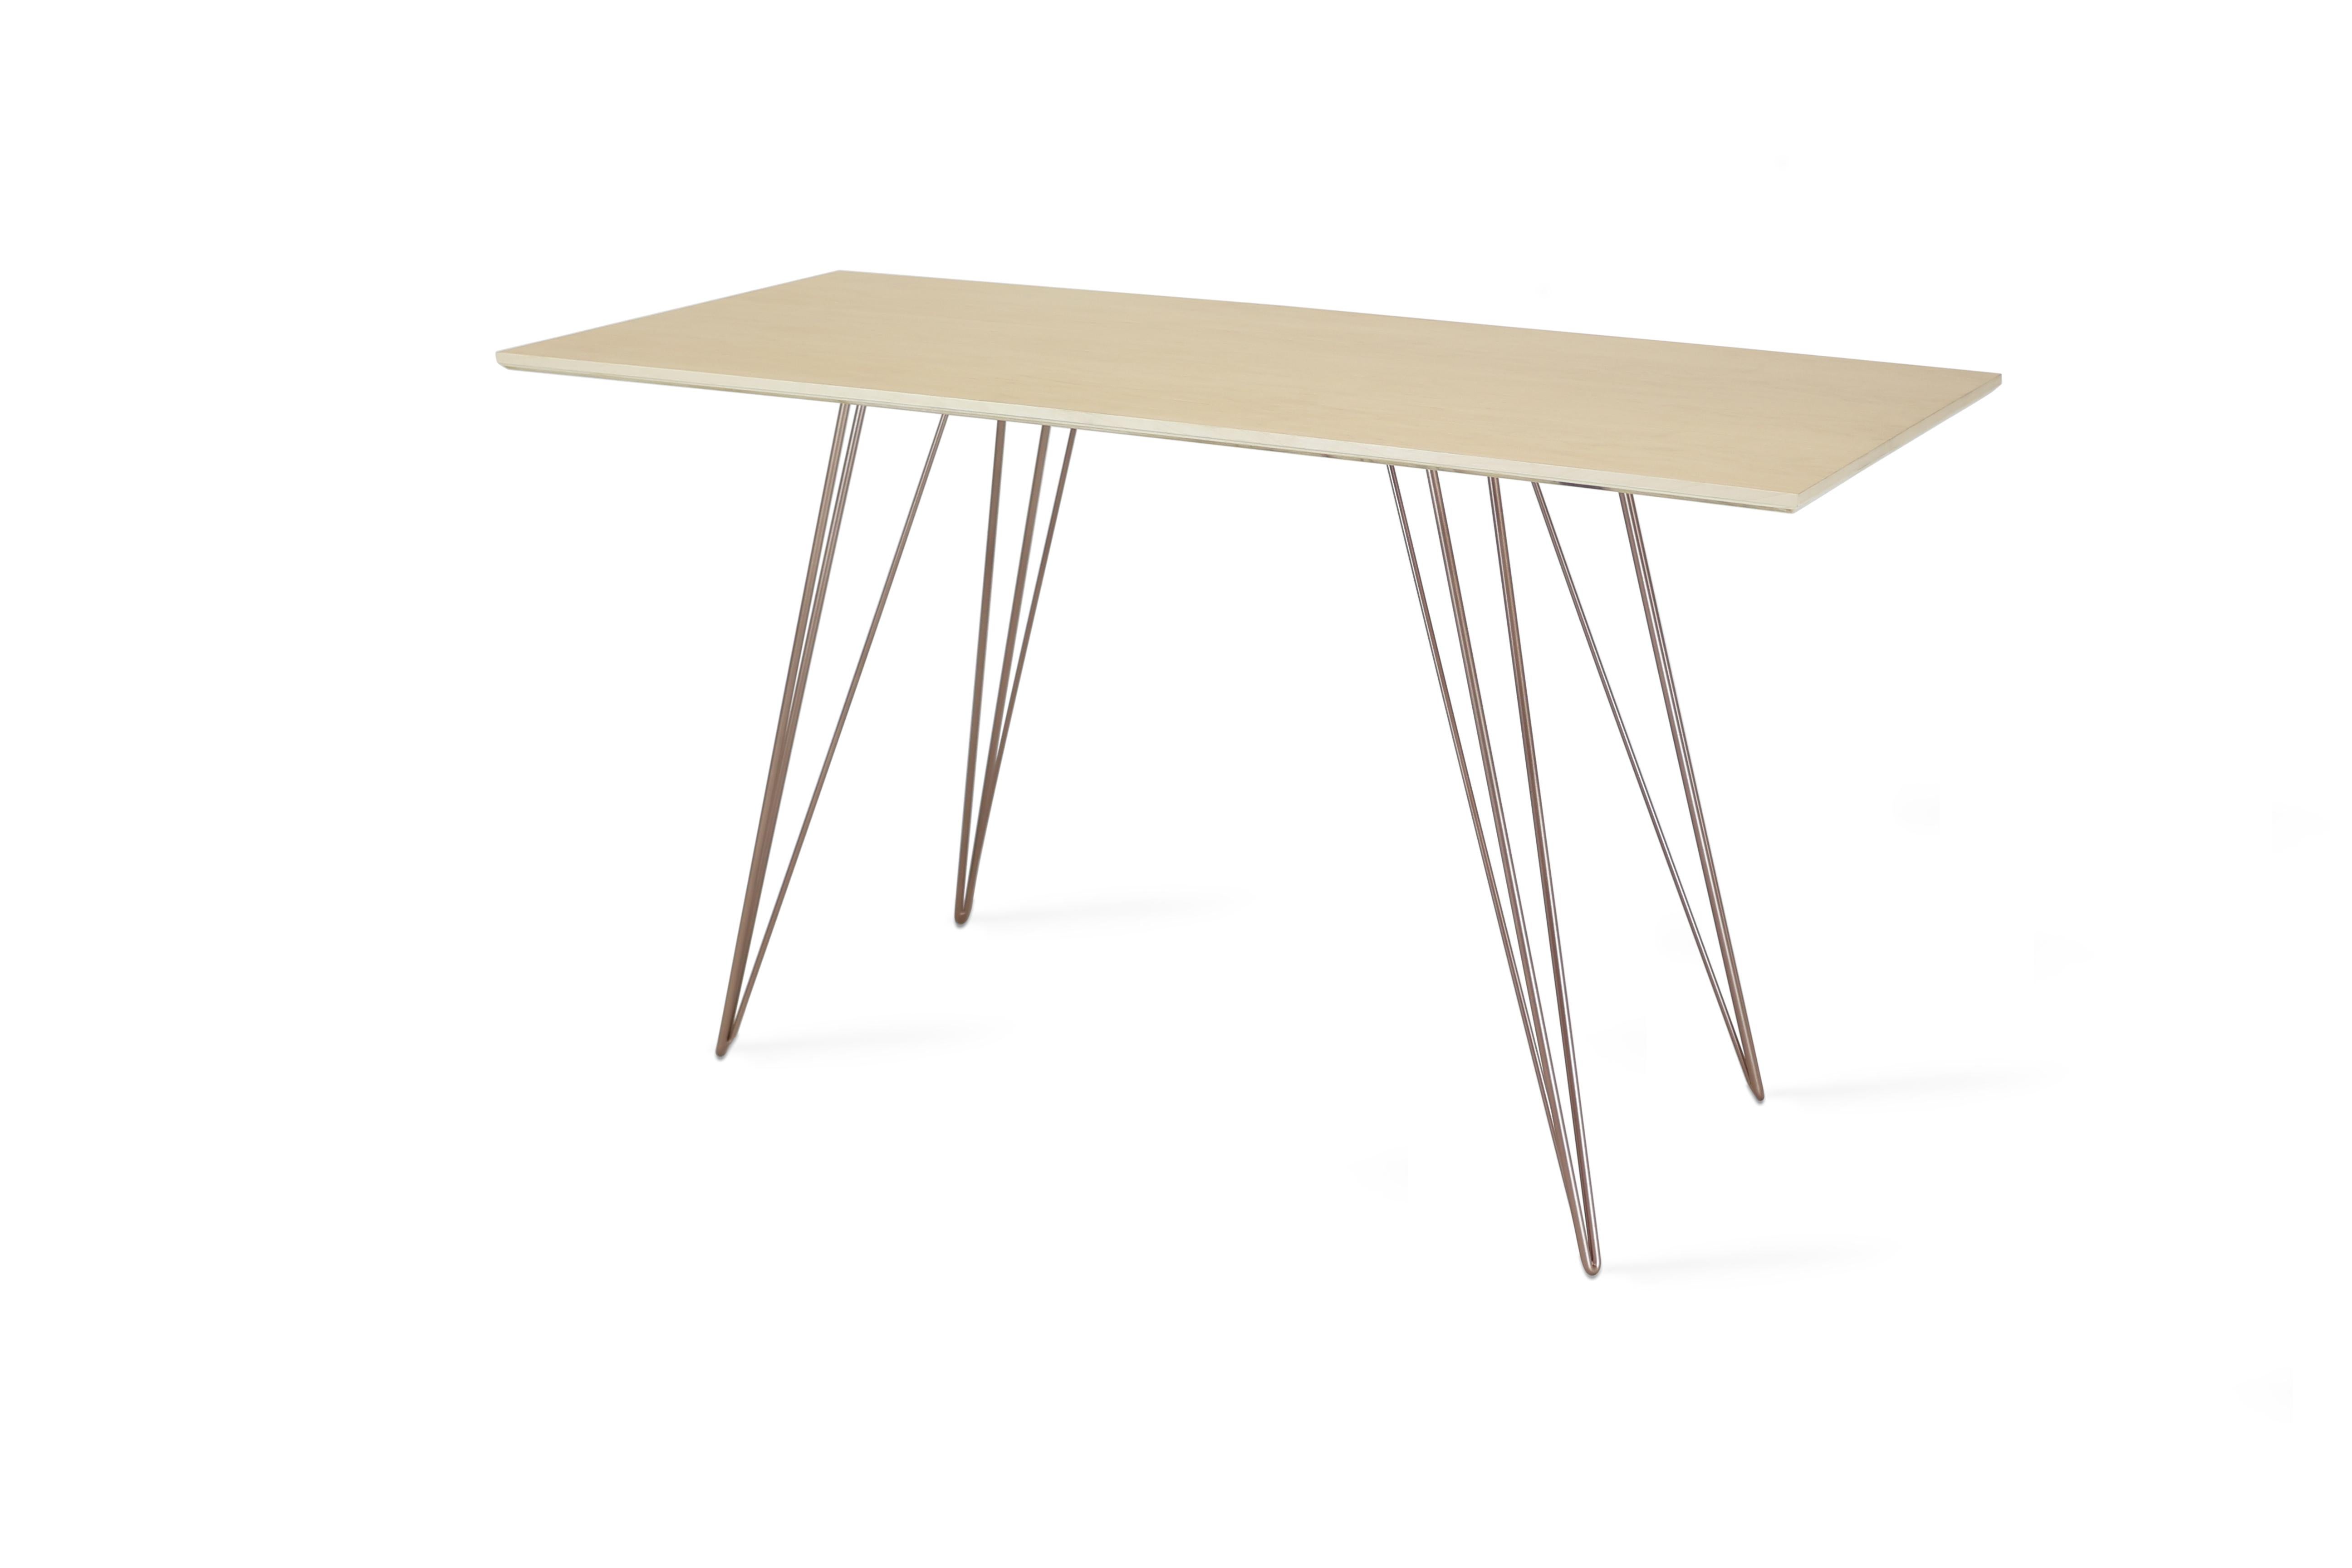 A thin, elegant and light desk that can be customized to any color desired. This handcrafted item perfectly blends industrial hairpin legs with a bevelled wooden top. The irregular beauty of its natural wood combined with its simple elegant base